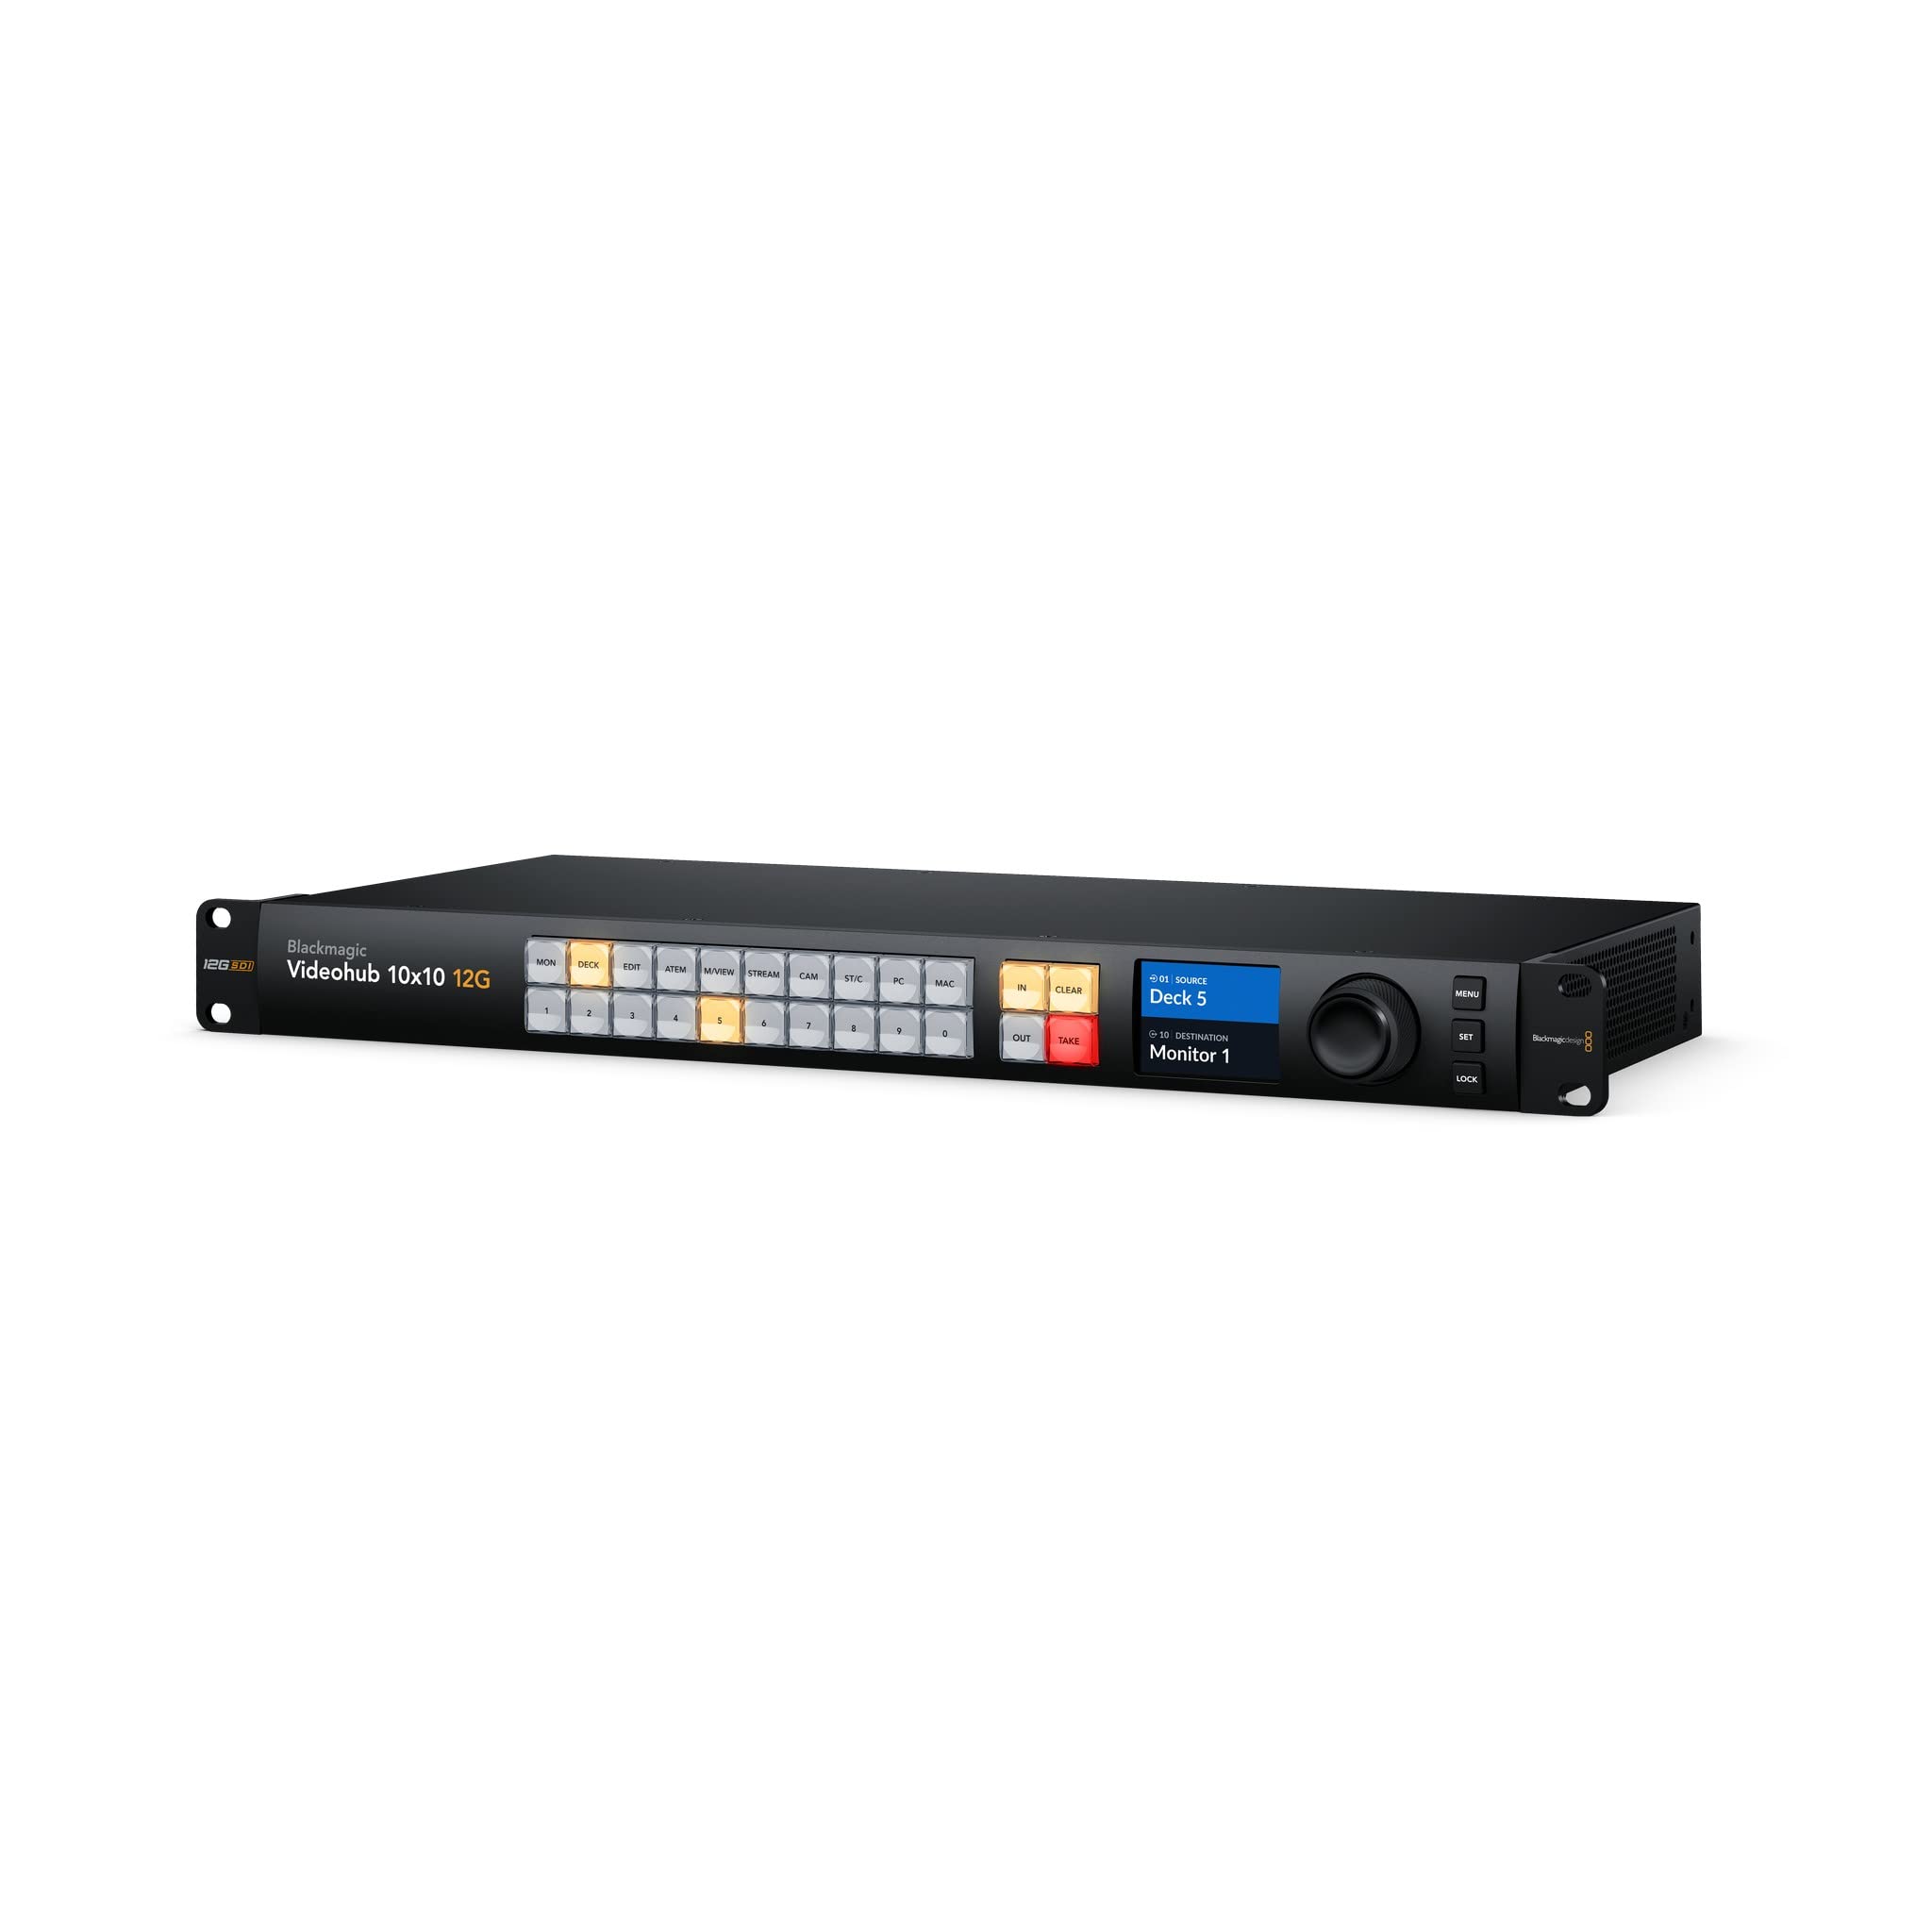 Blackmagic Design Videohub 12G Router, 10 Inputs and 10 Outputs